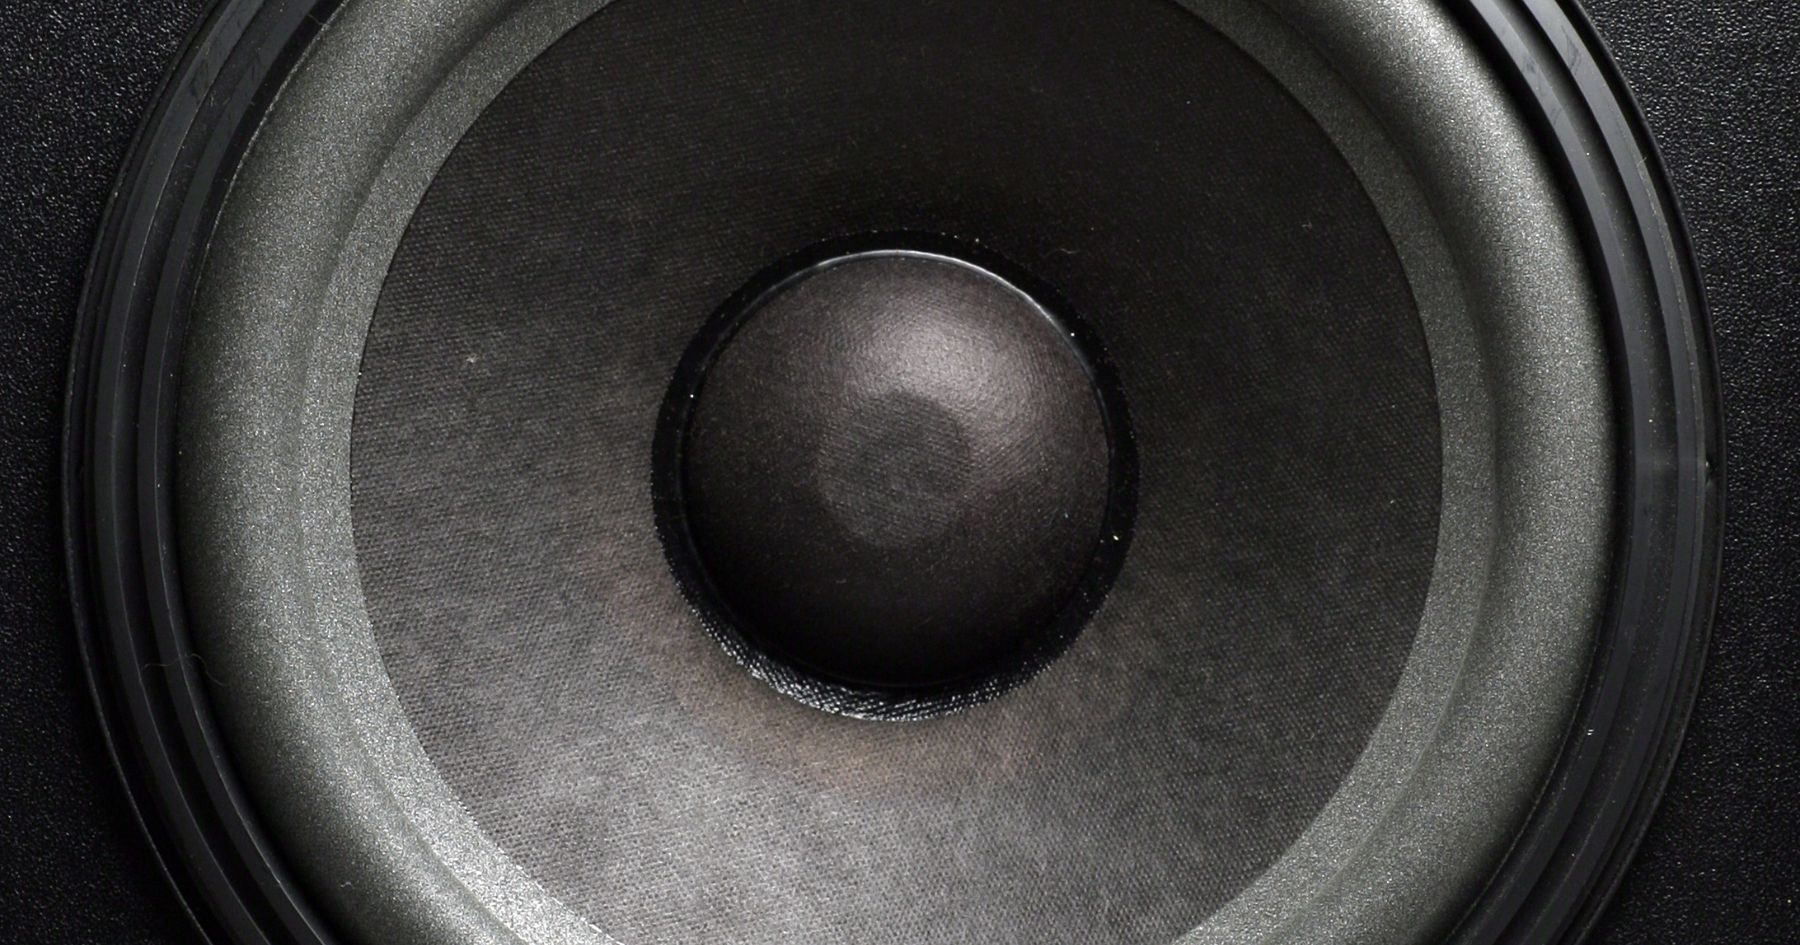 Why Do My Speakers Crackle when I Turn up The Volume?